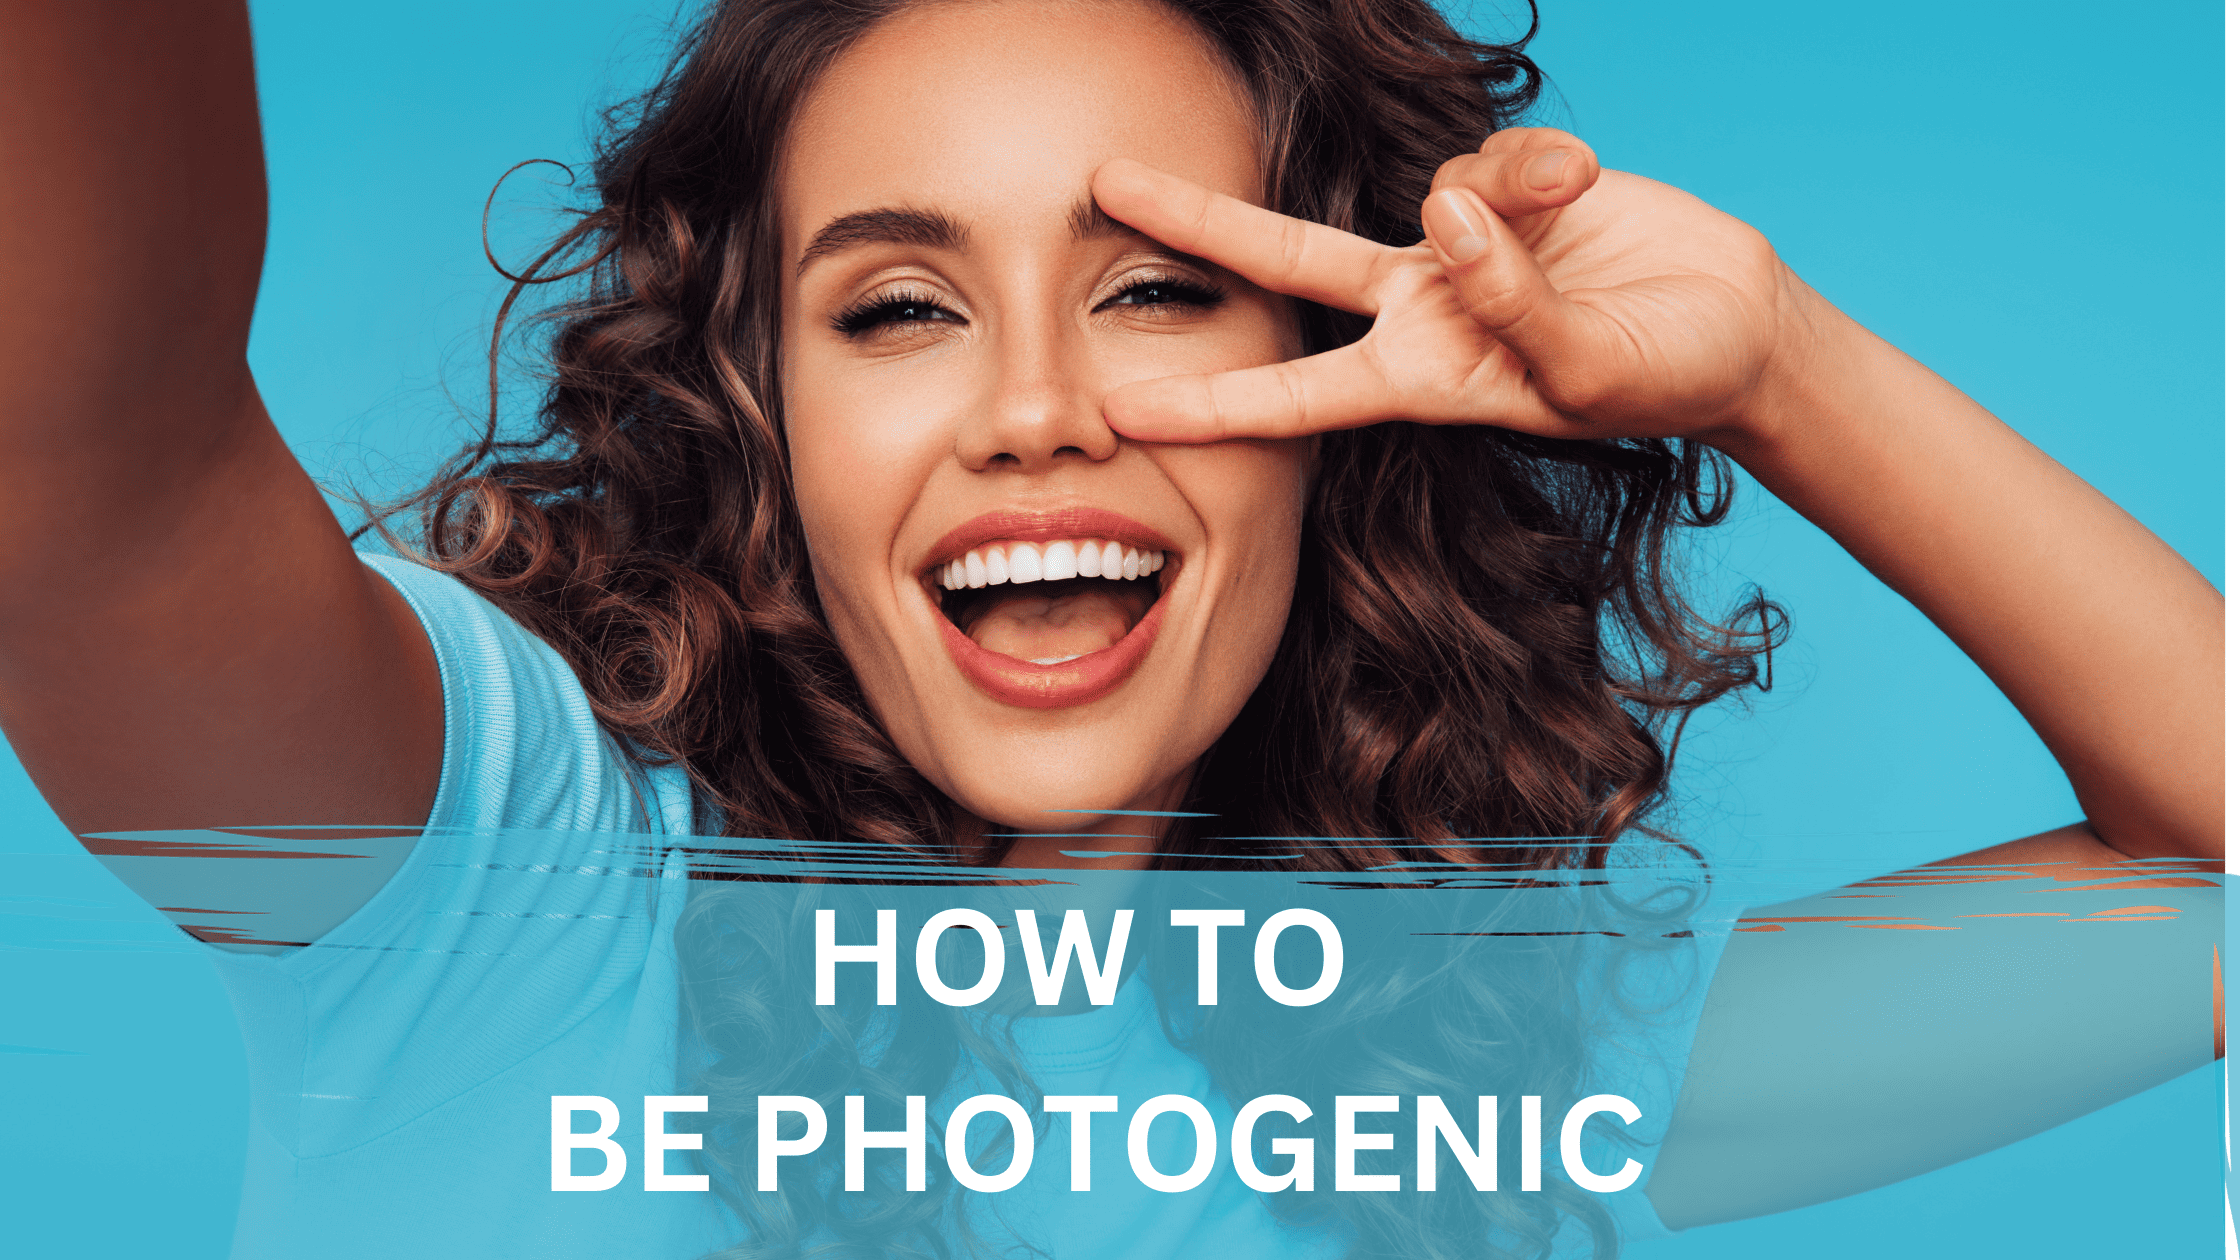 How to Be Photogenic